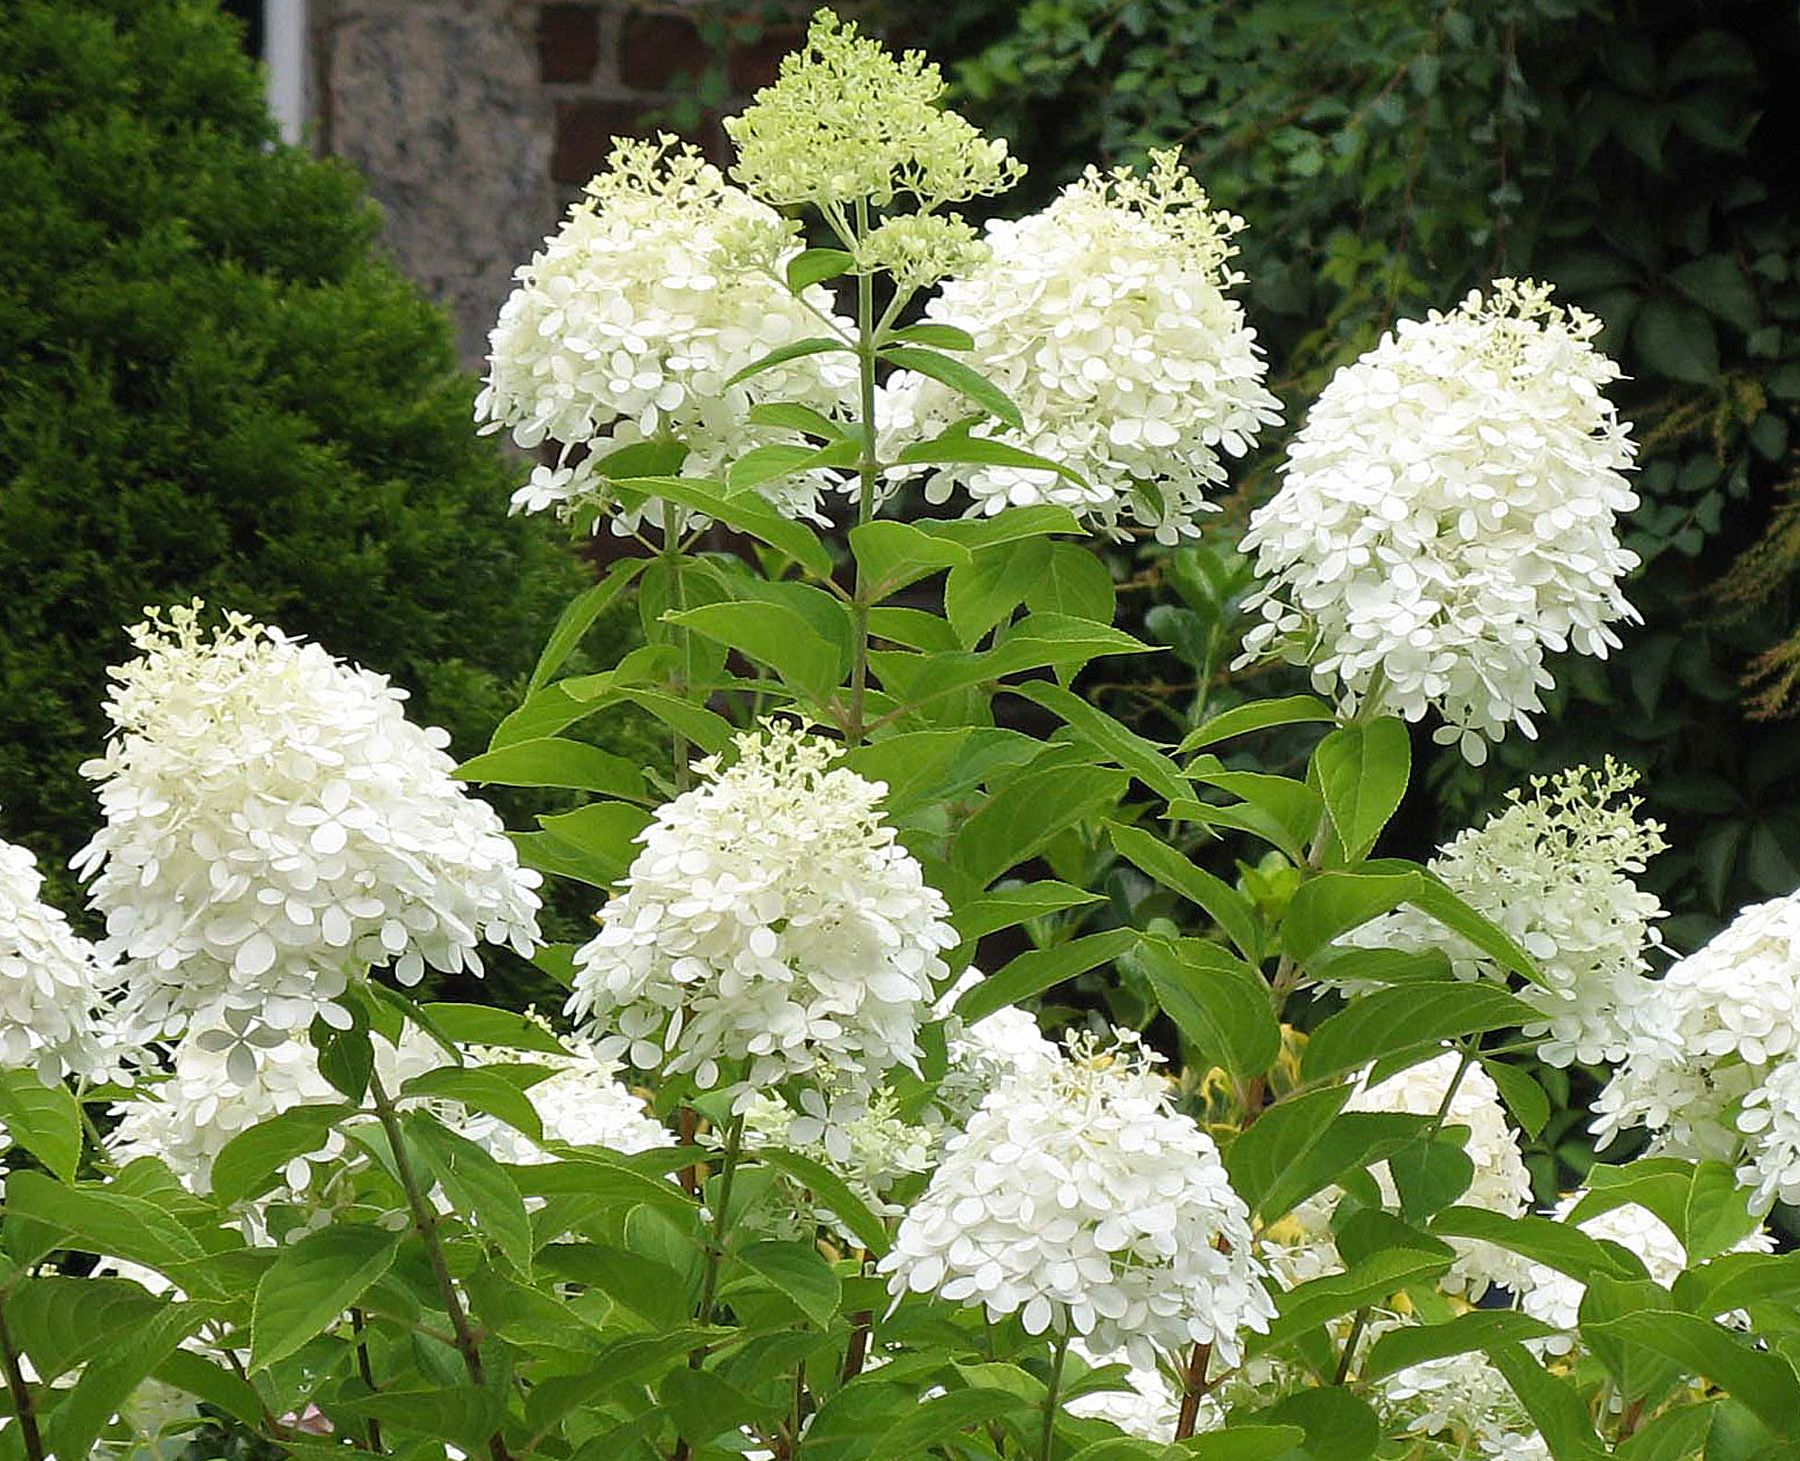 Pee Gee Hydrangea (1.25m)Very large cone-shaped white flower heads ...